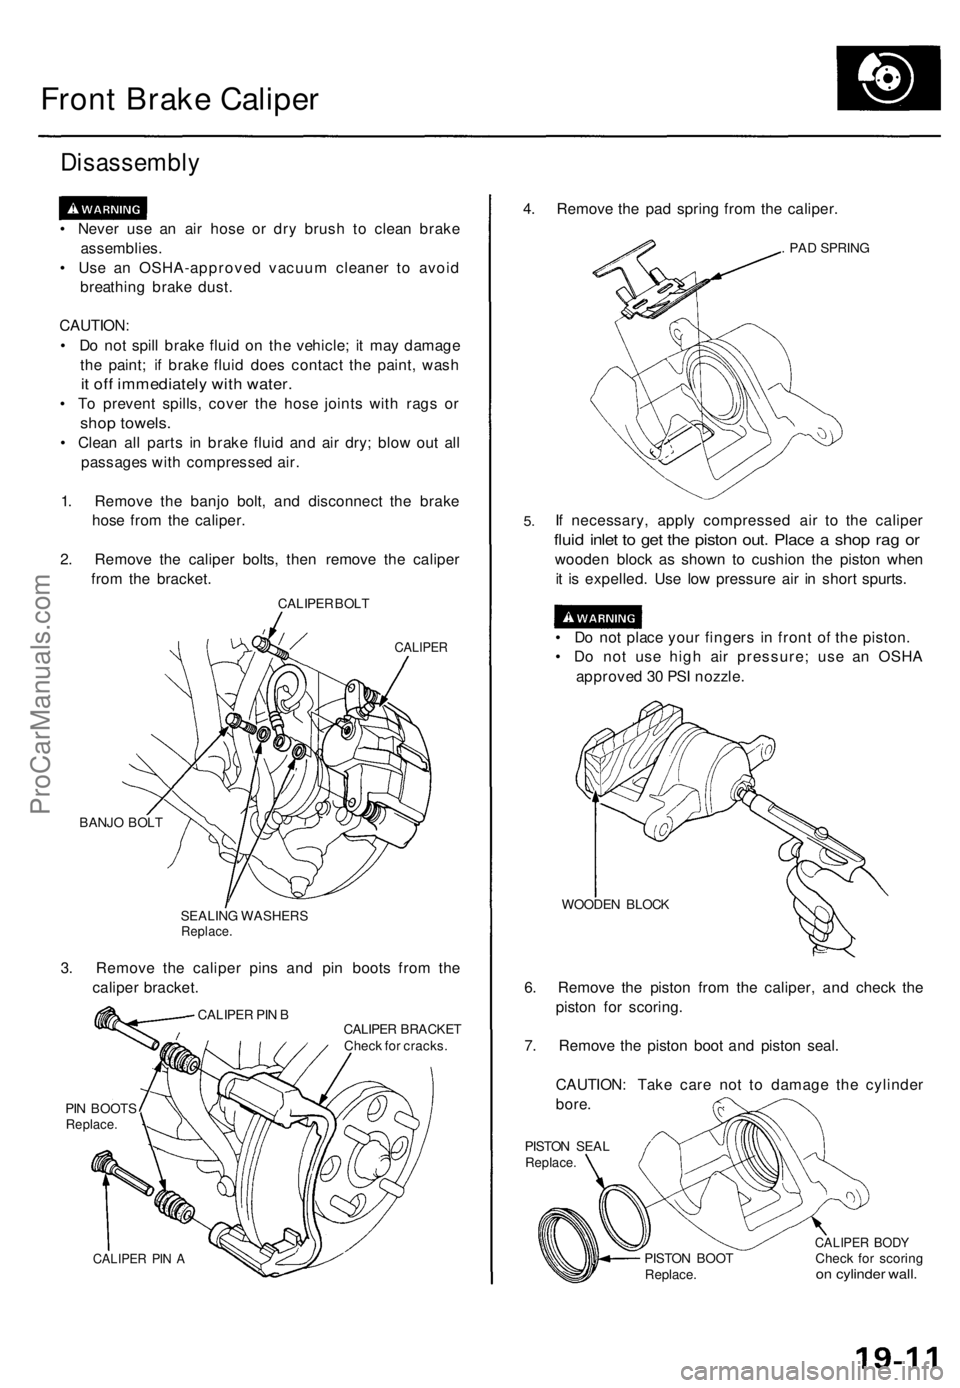 ACURA TL 1995  Service Repair Manual 
Front Brake Caliper

Disassembly

• Never use an air hose or dry brush to clean brake

assemblies.

• Use an OSHA-approved vacuum cleaner to avoid

breathing brake dust.

CAUTION:

• Do not spi